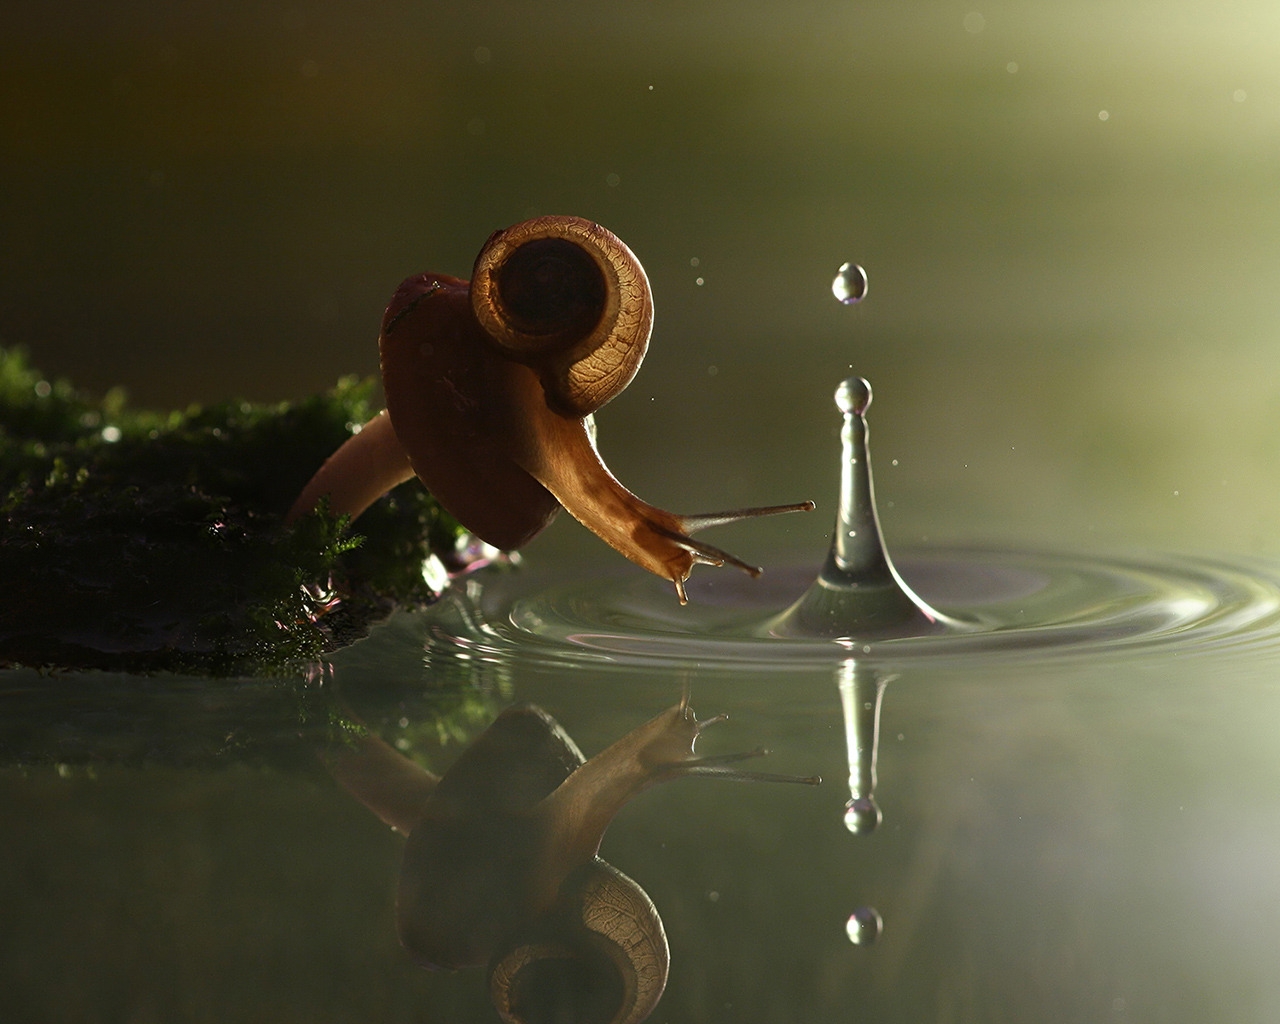 Falling Snail for 1280 x 1024 resolution